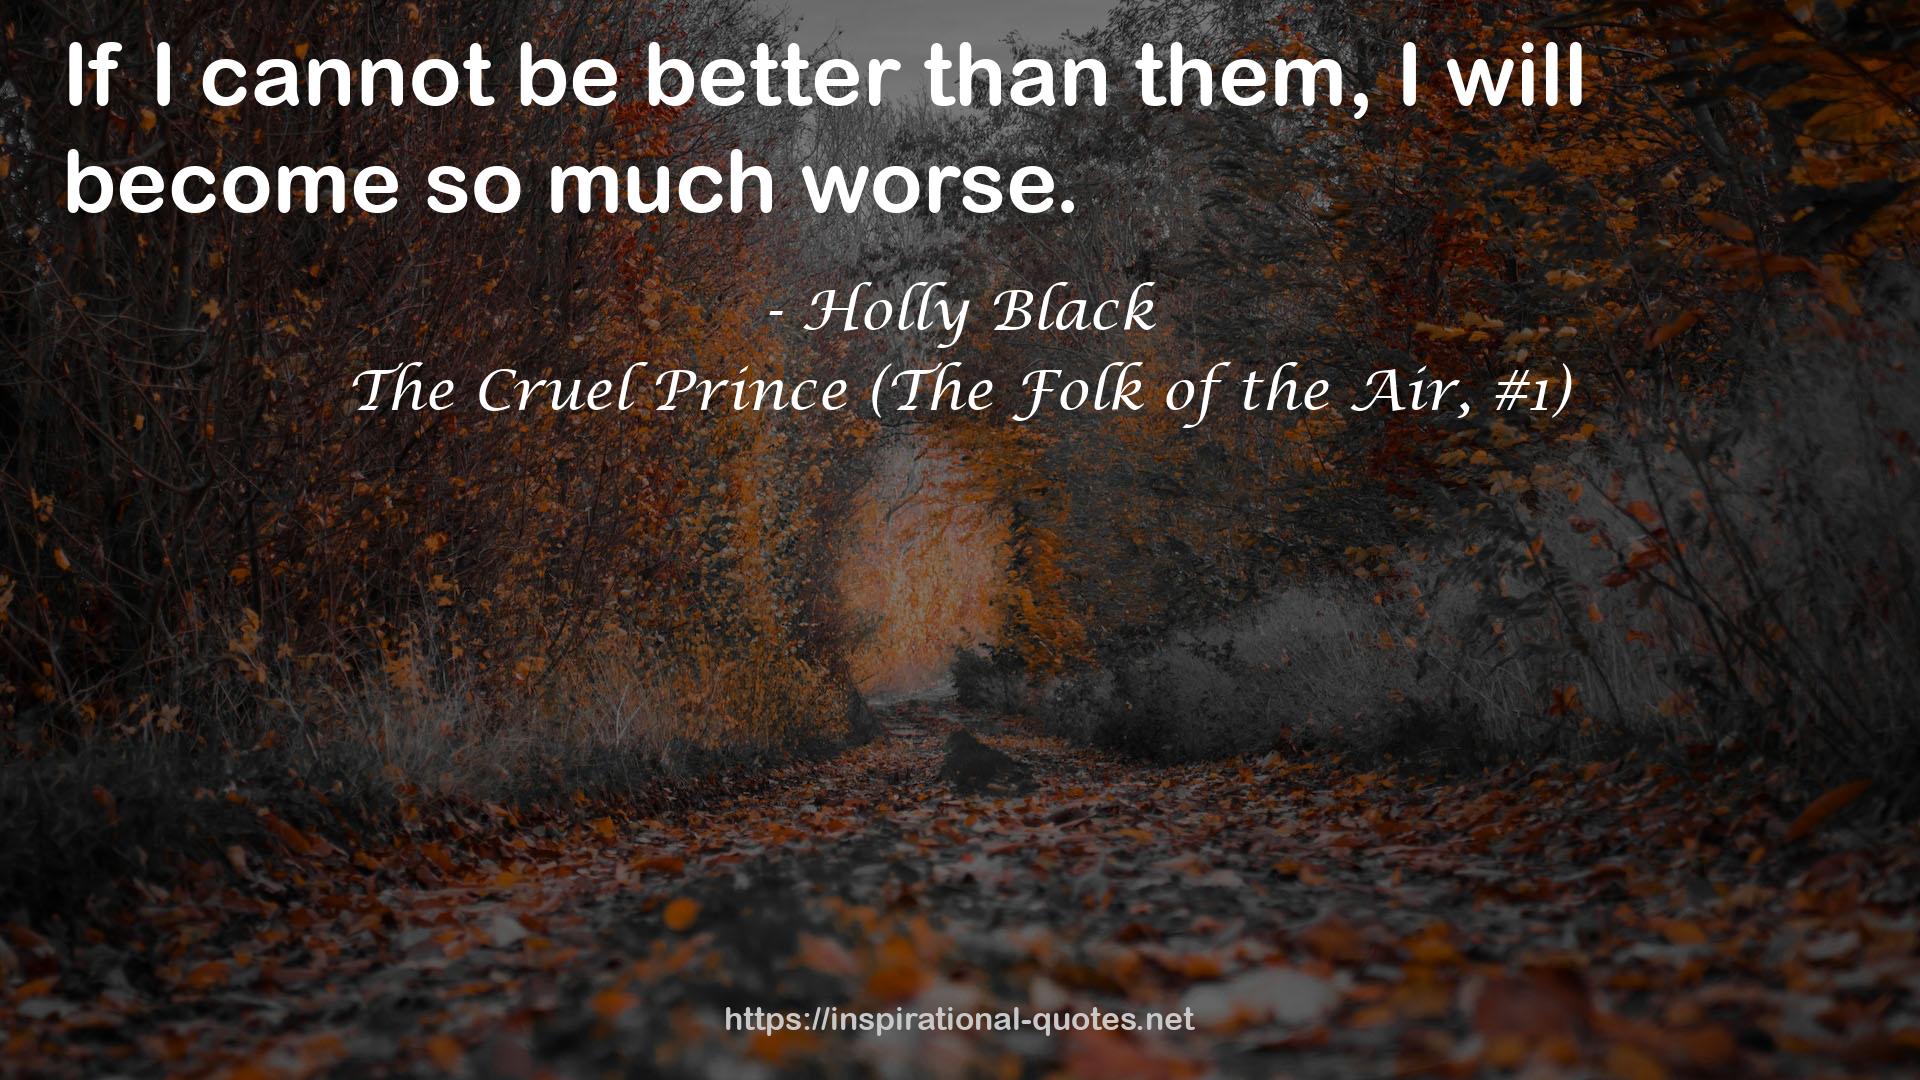 The Cruel Prince (The Folk of the Air, #1) QUOTES